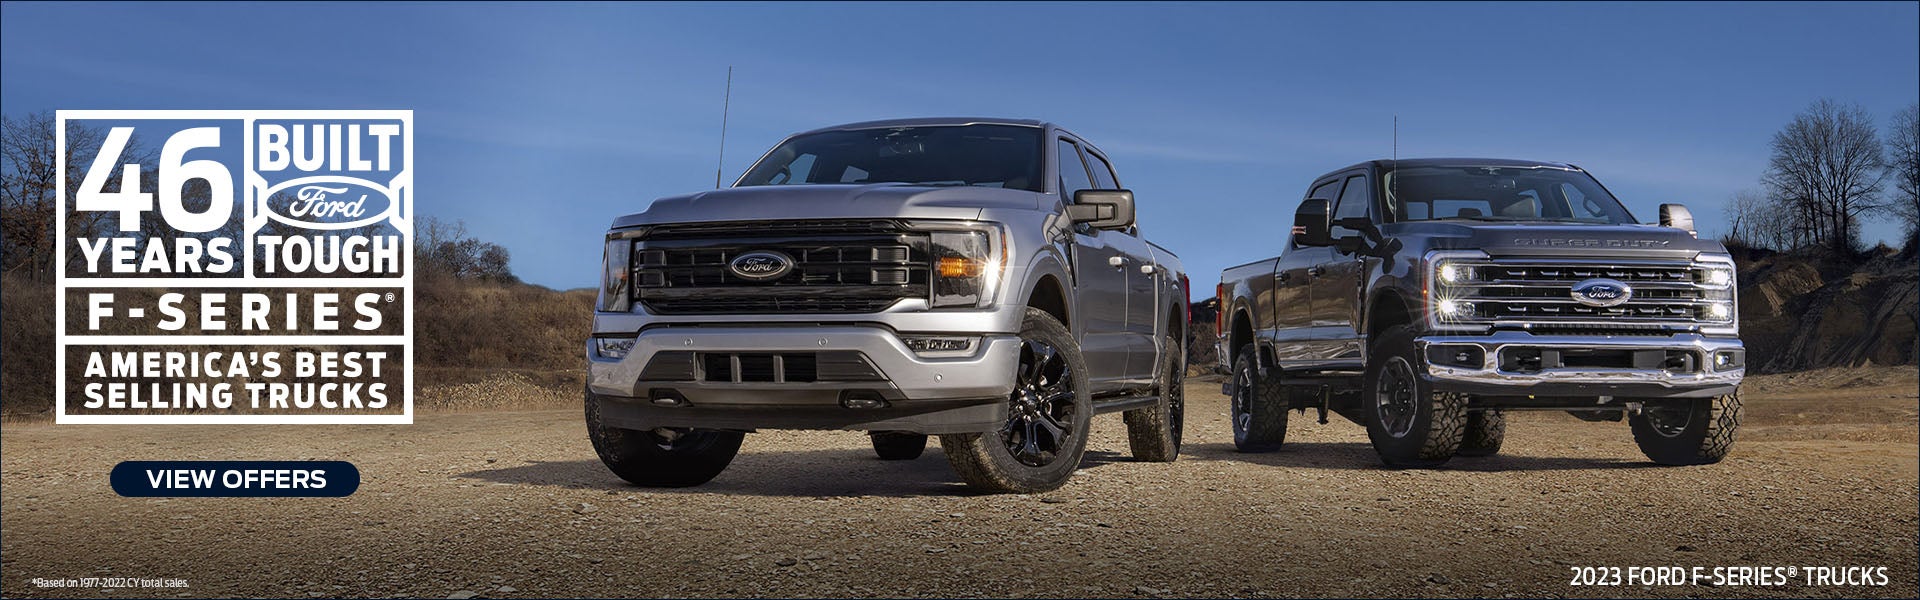 2022 Ford Super Duty Truck